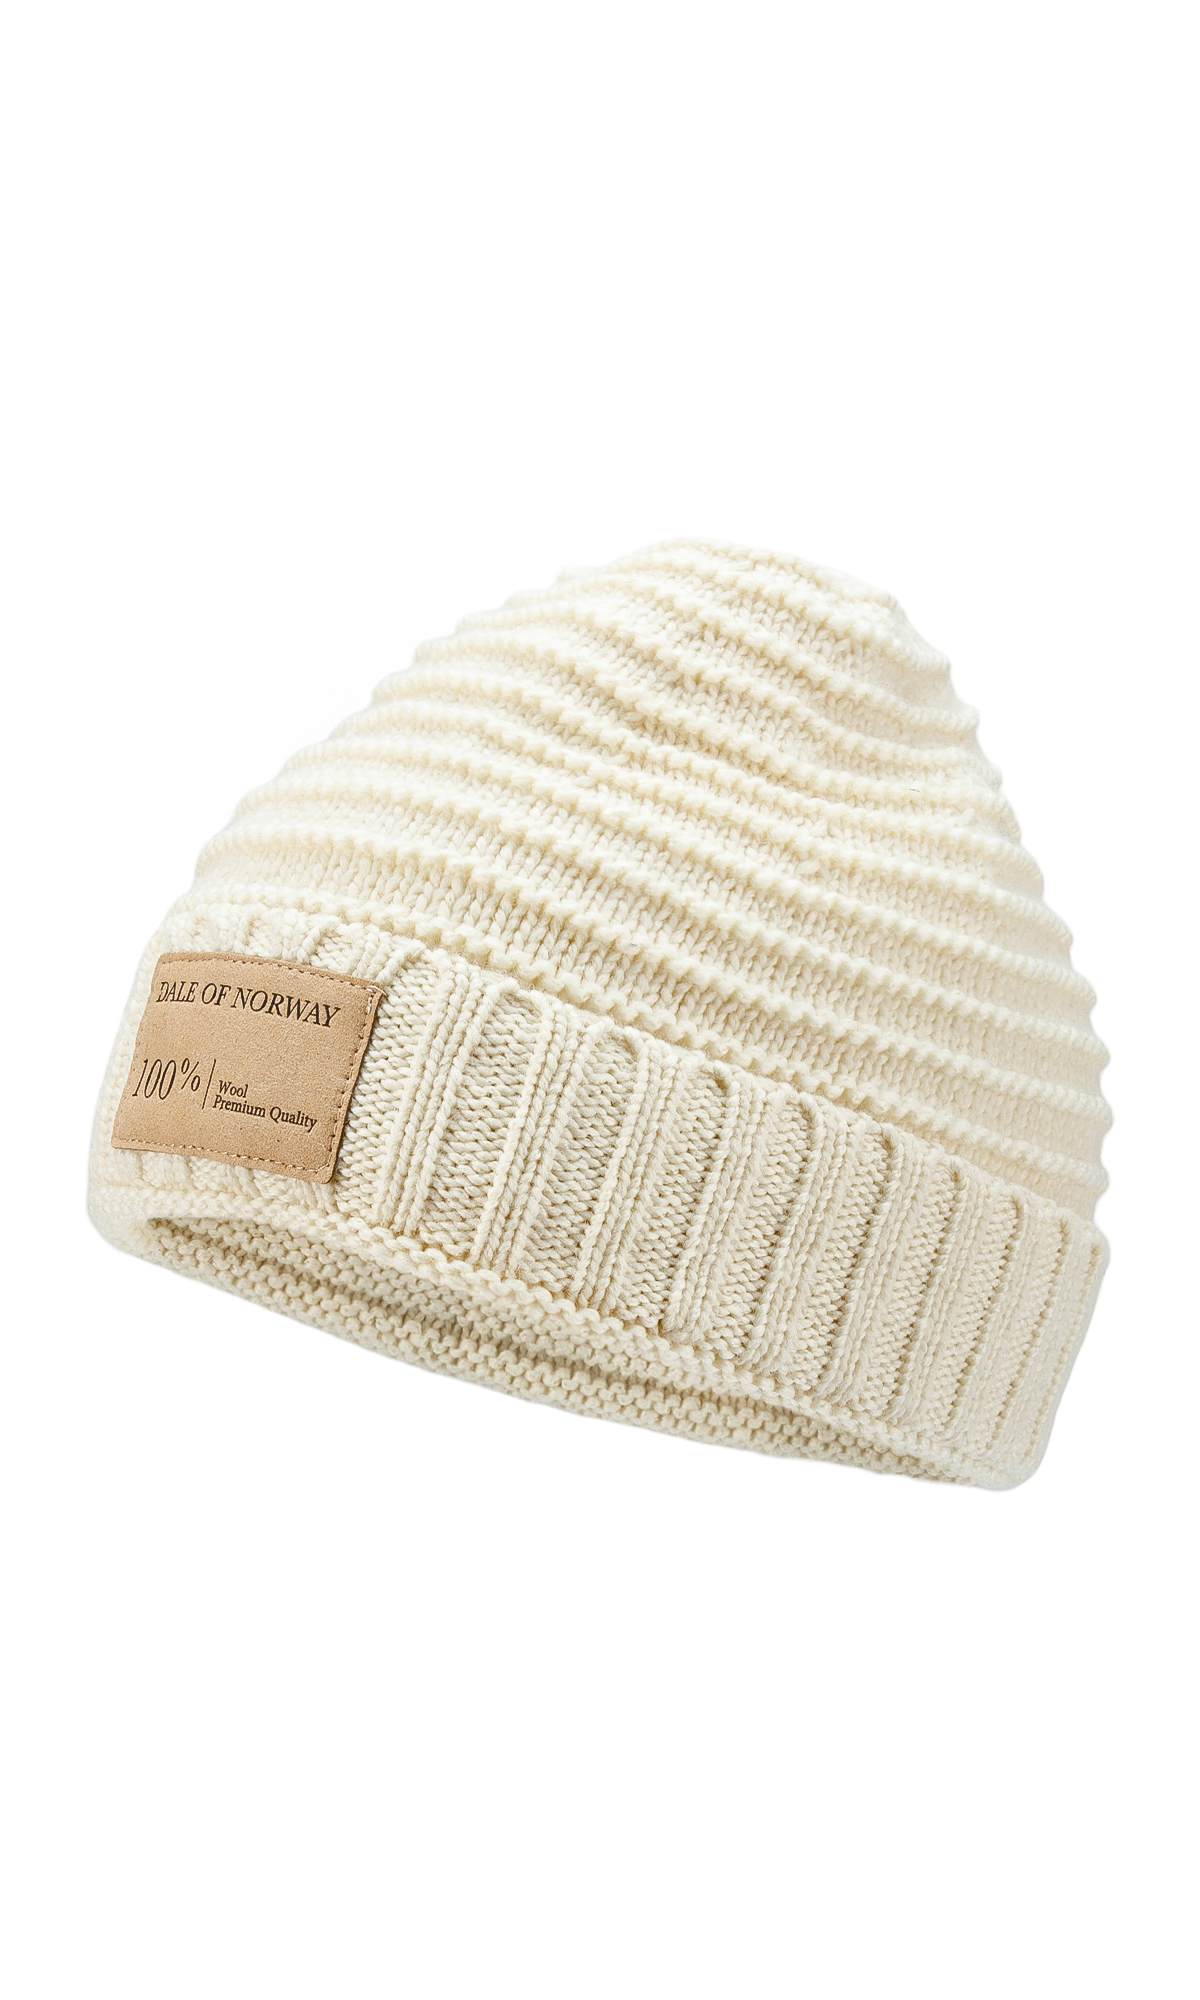 Måløy hat - Unisex - Offwhite - Dale of Norway - Dale of Norway